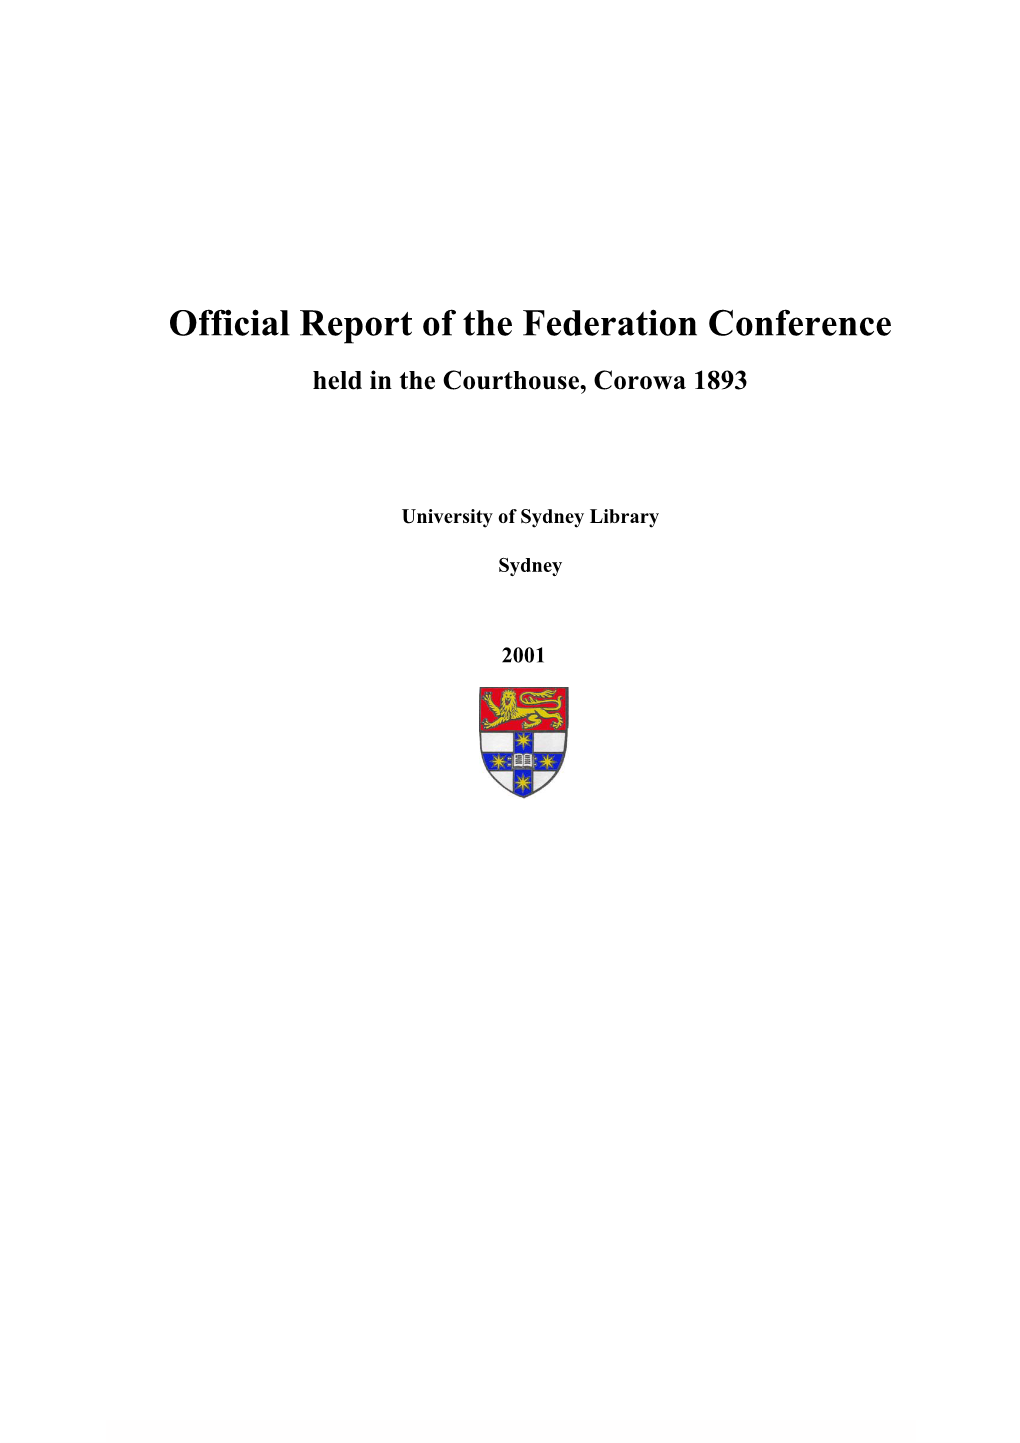 Official Report of the Federation Conference Held in the Courthouse, Corowa 1893